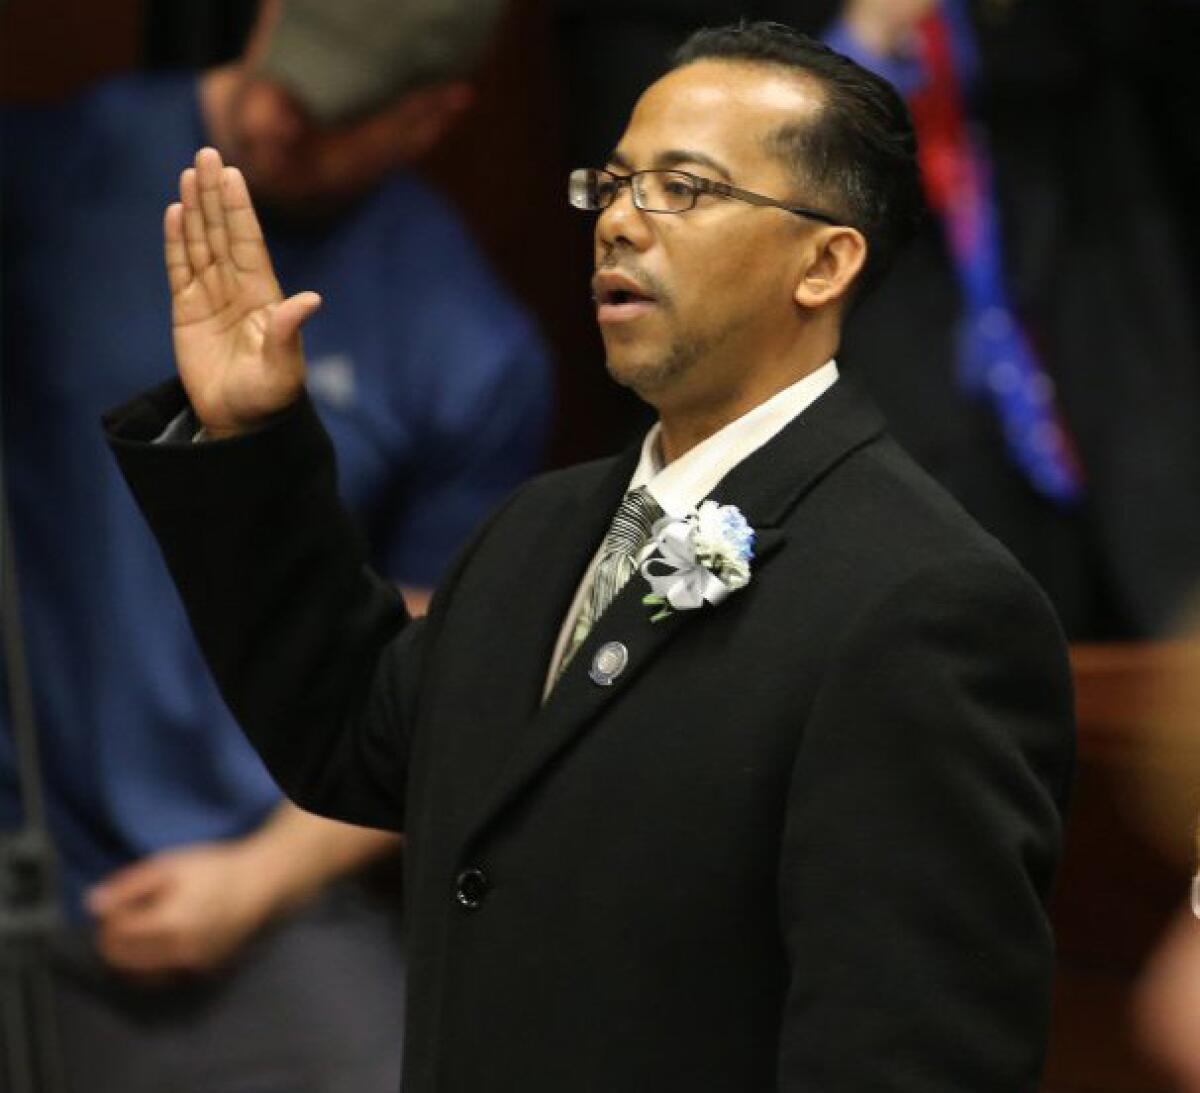 Officials are concerned that Nevada Assemblyman Steven Brooks, arrested last month on suspicion of threatening a colleague, may have tried to buy a gun recently.